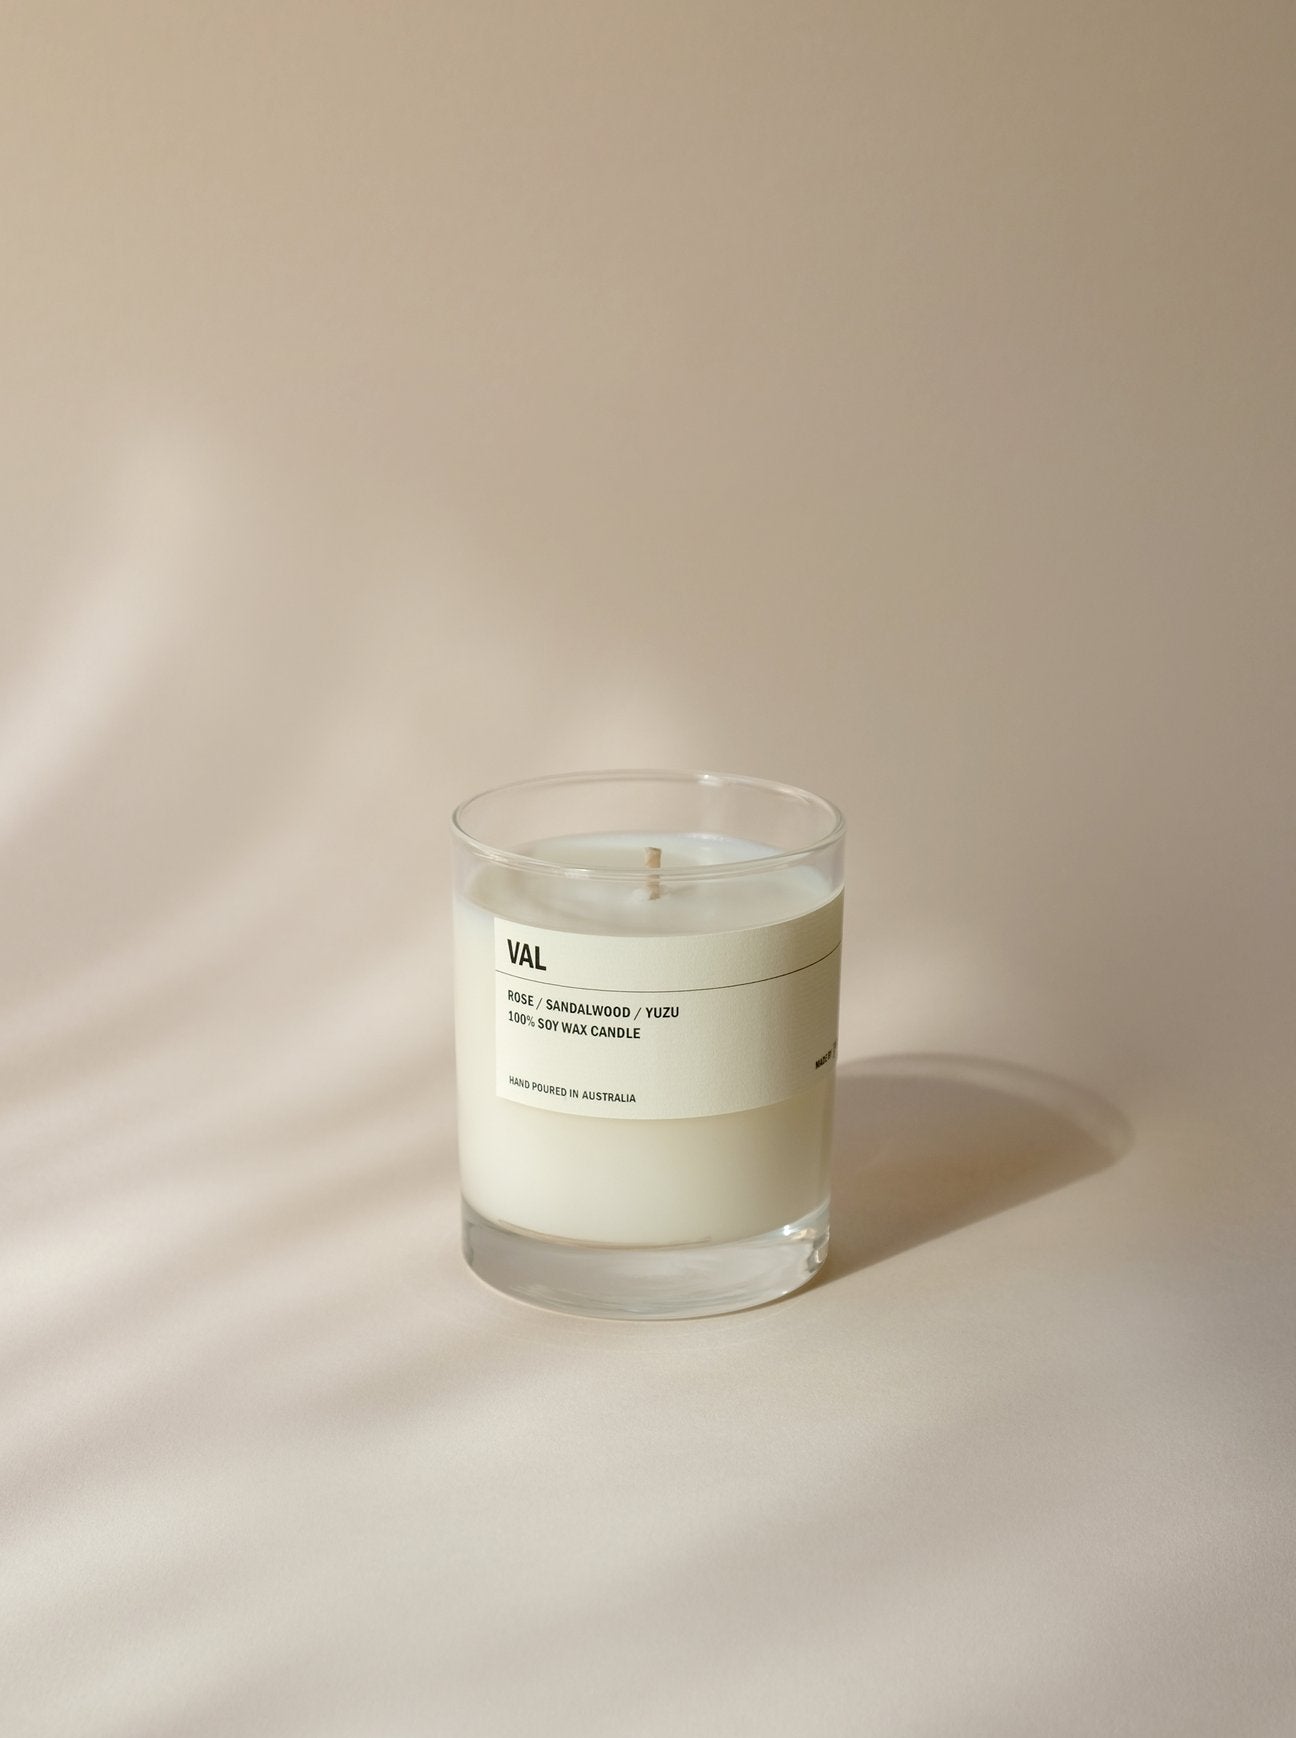 Posie-300g-Clear-Soy-wax-Candle-VAL_Simple-Beautiful-Things